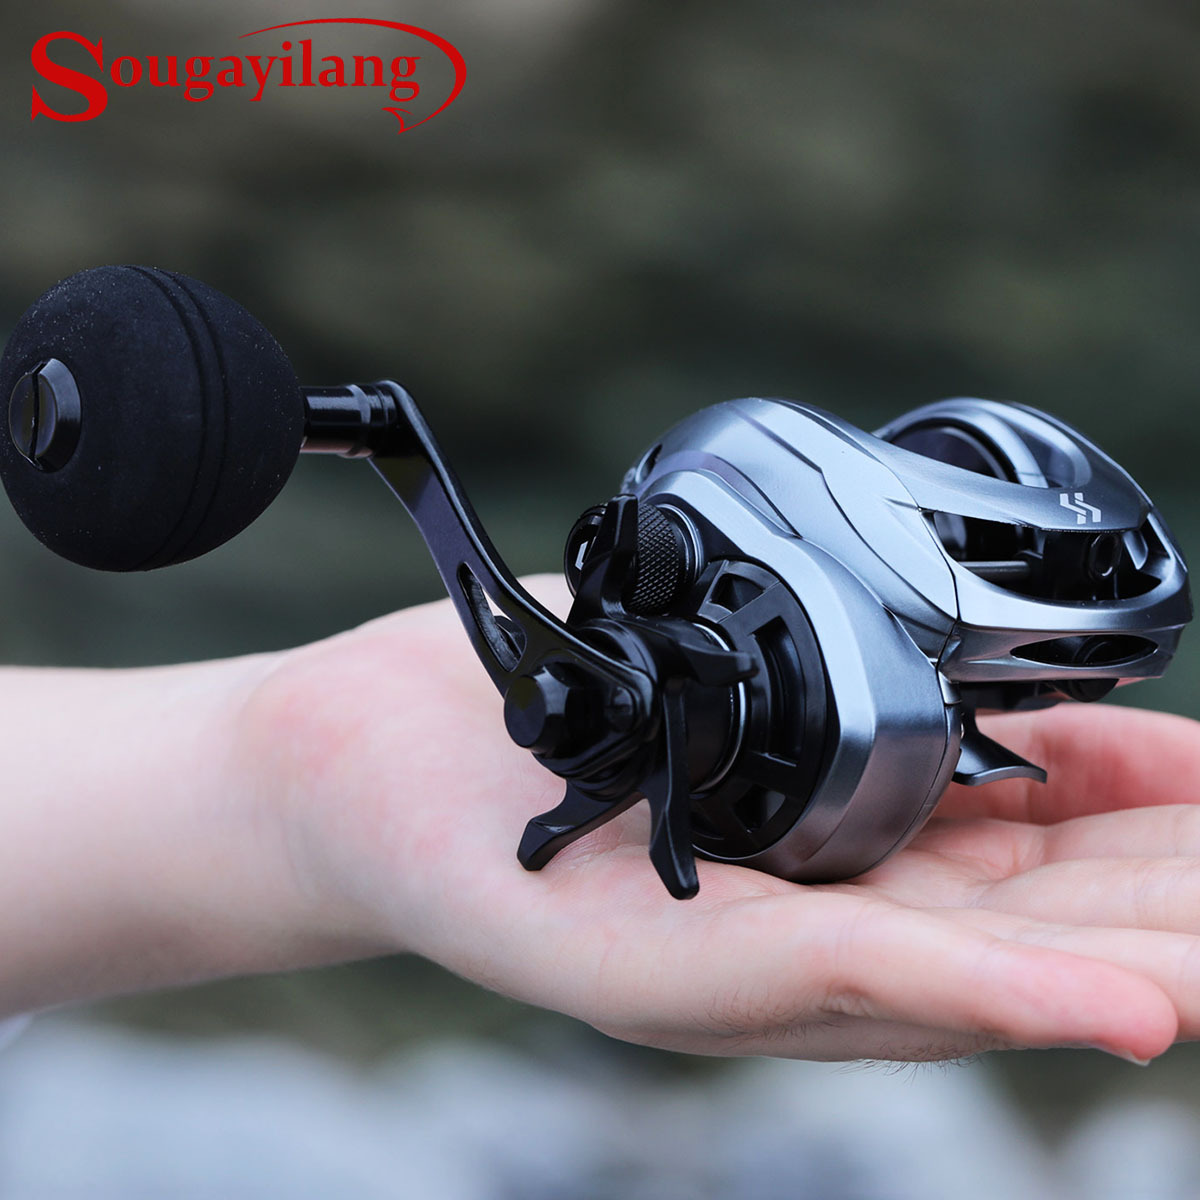 Sougayilang Baitcaster with 9+1 Ball Bearings, Gear Ratio 8.0:1 Magnetic Brake System Baitcasting Fishing Reel, Size: Left, Silver